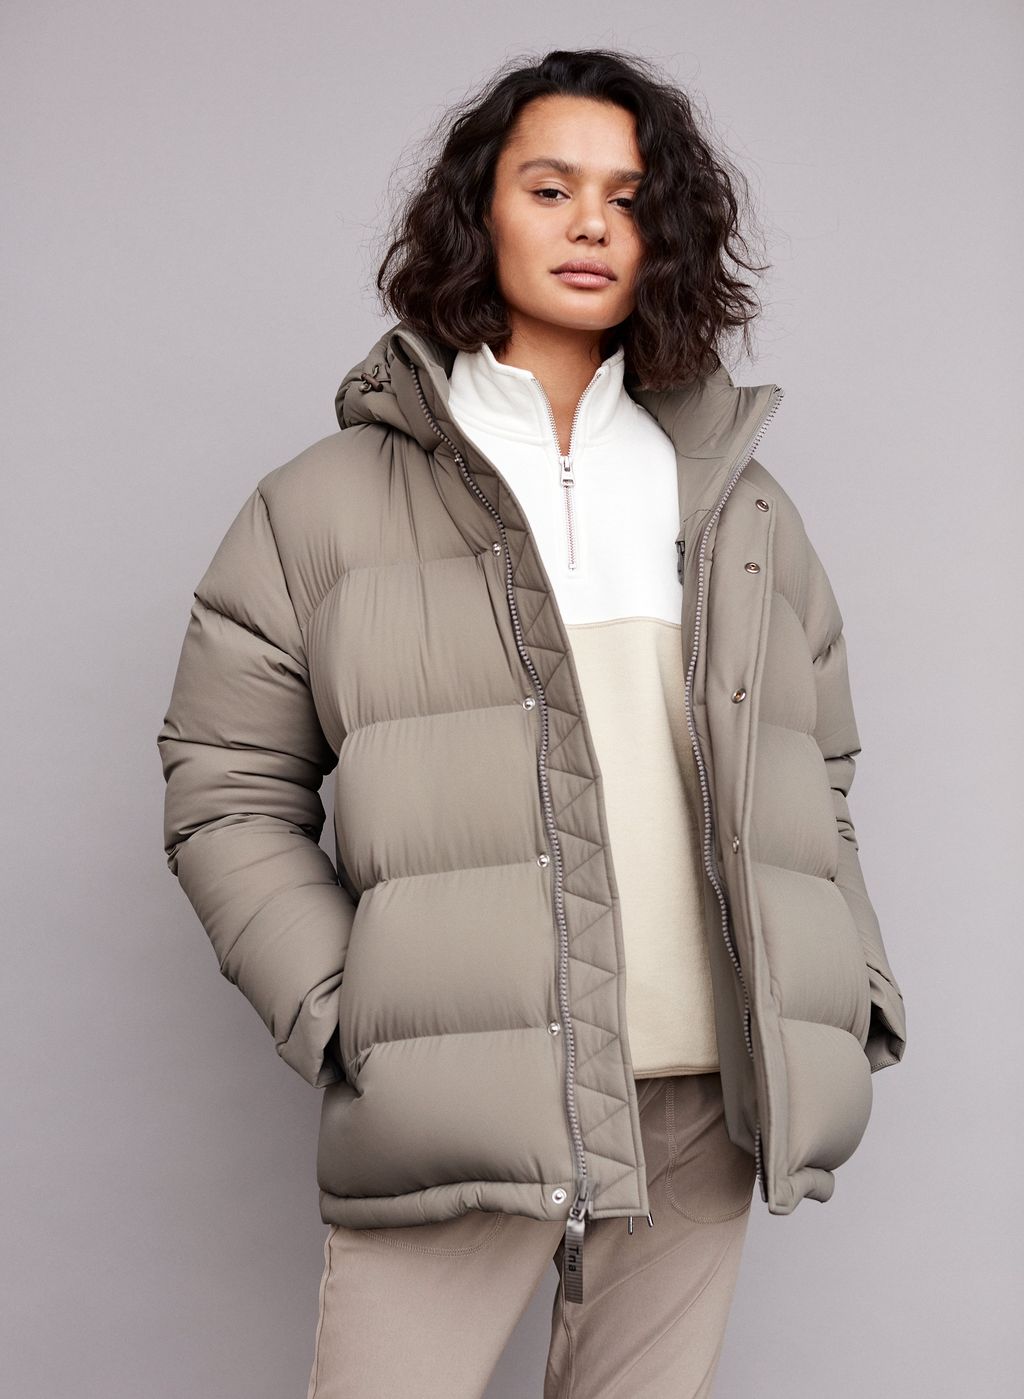 Shop the Best Warm Coats for Winter | Who What Wear